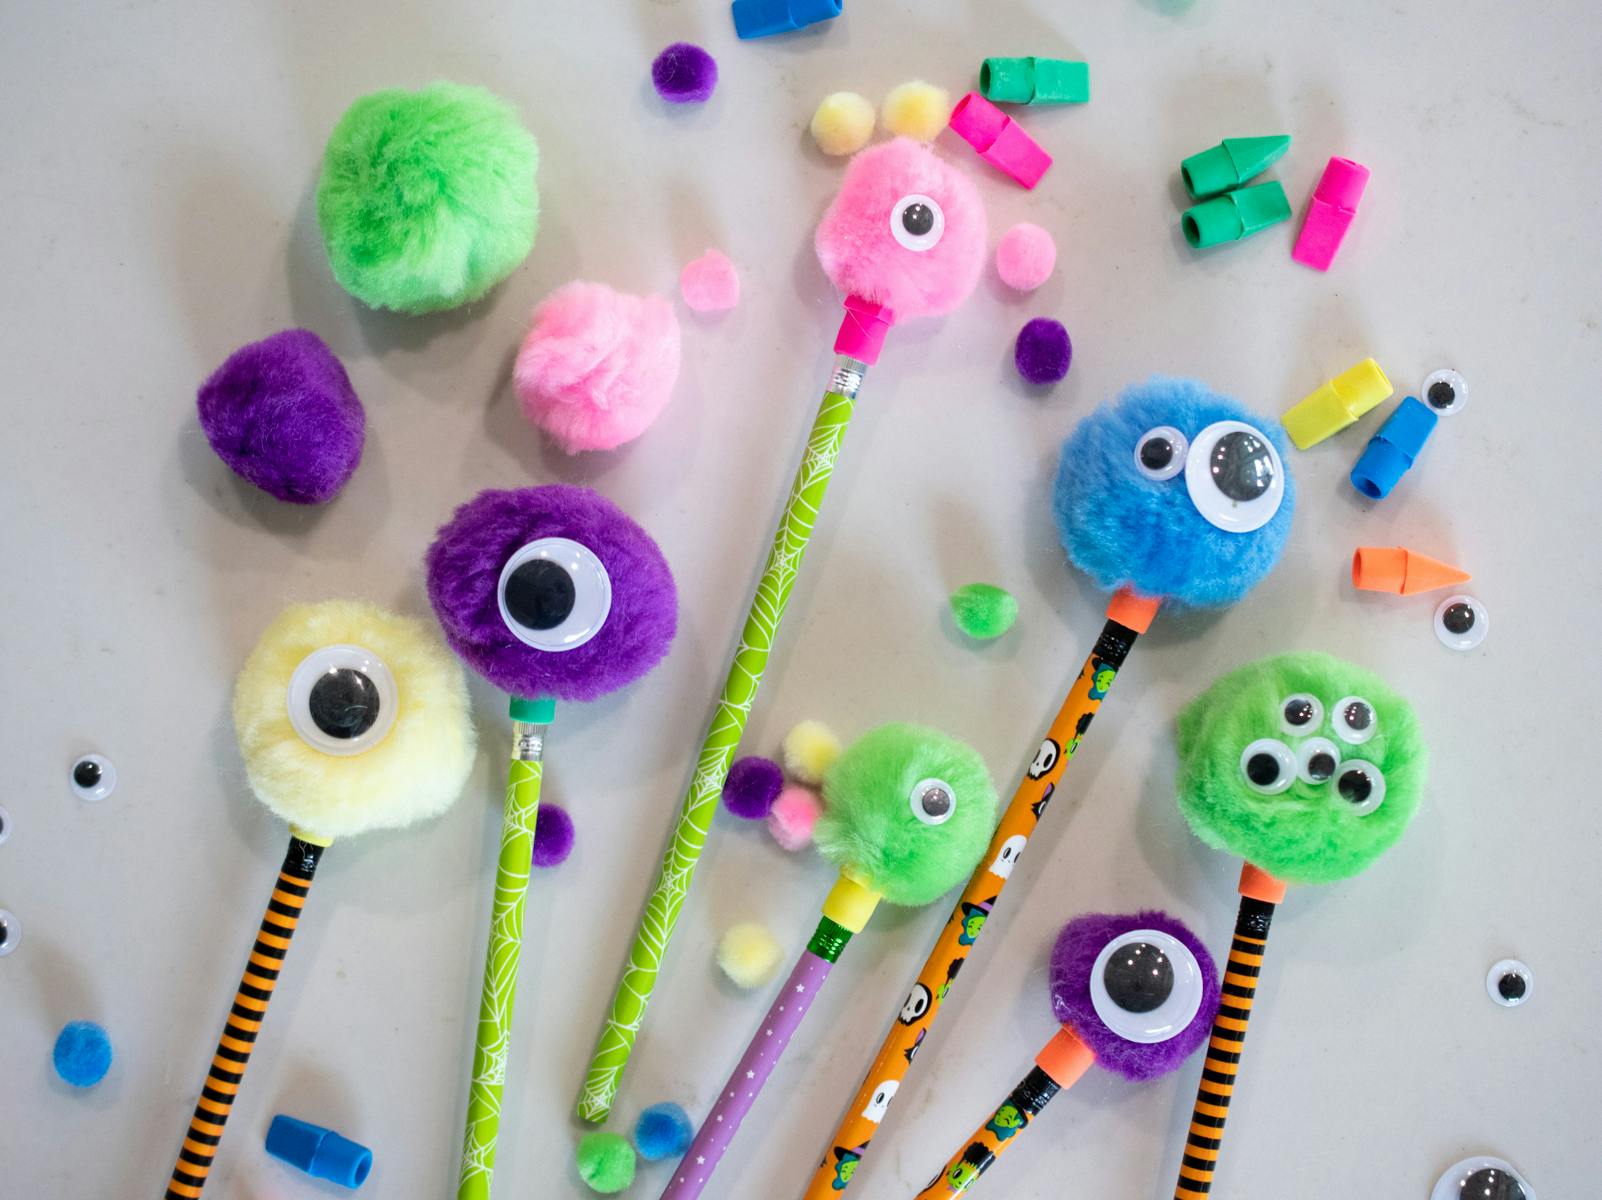 Little monsters made of pom pom balls and goggly eyes glued onto Halloween pencils.